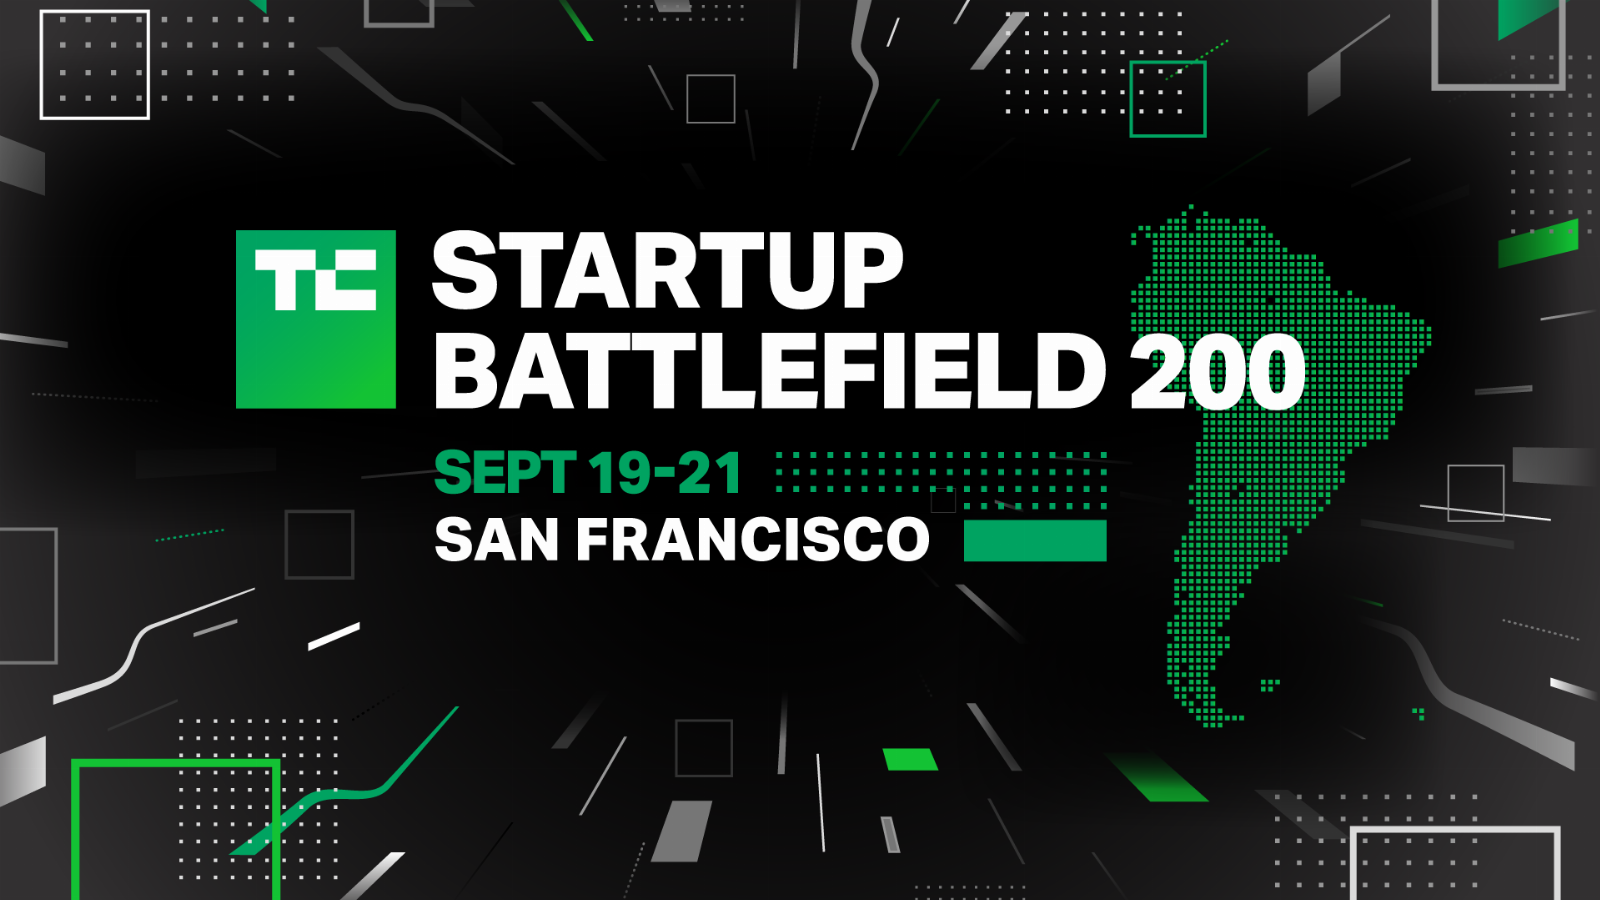 South American startups: Apply to Startup Battlefield 200